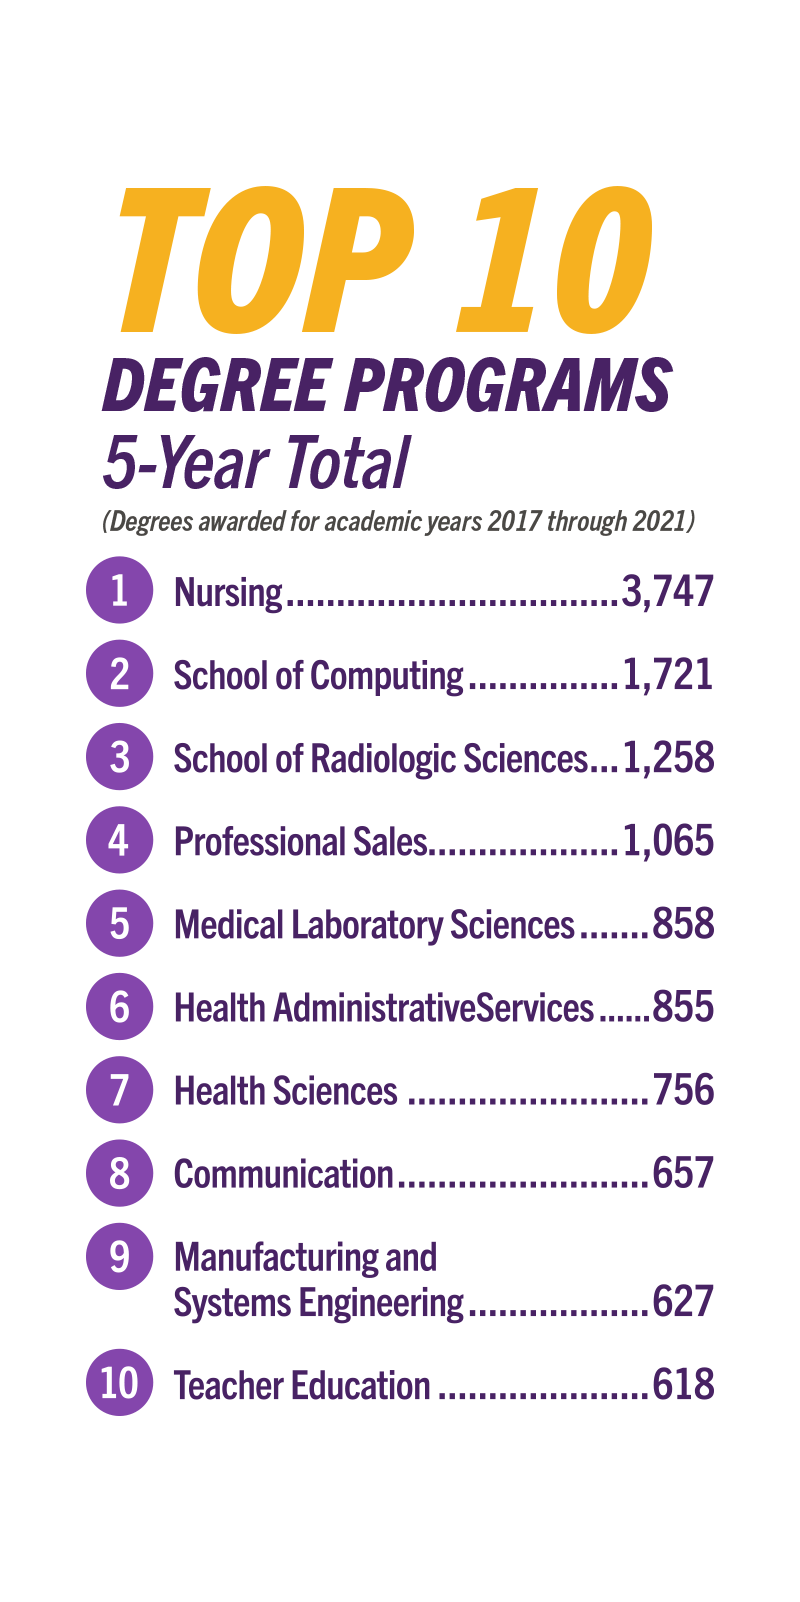 List of Weber State’s top 10 degree programs awarded for academic years 2016 through 2020.